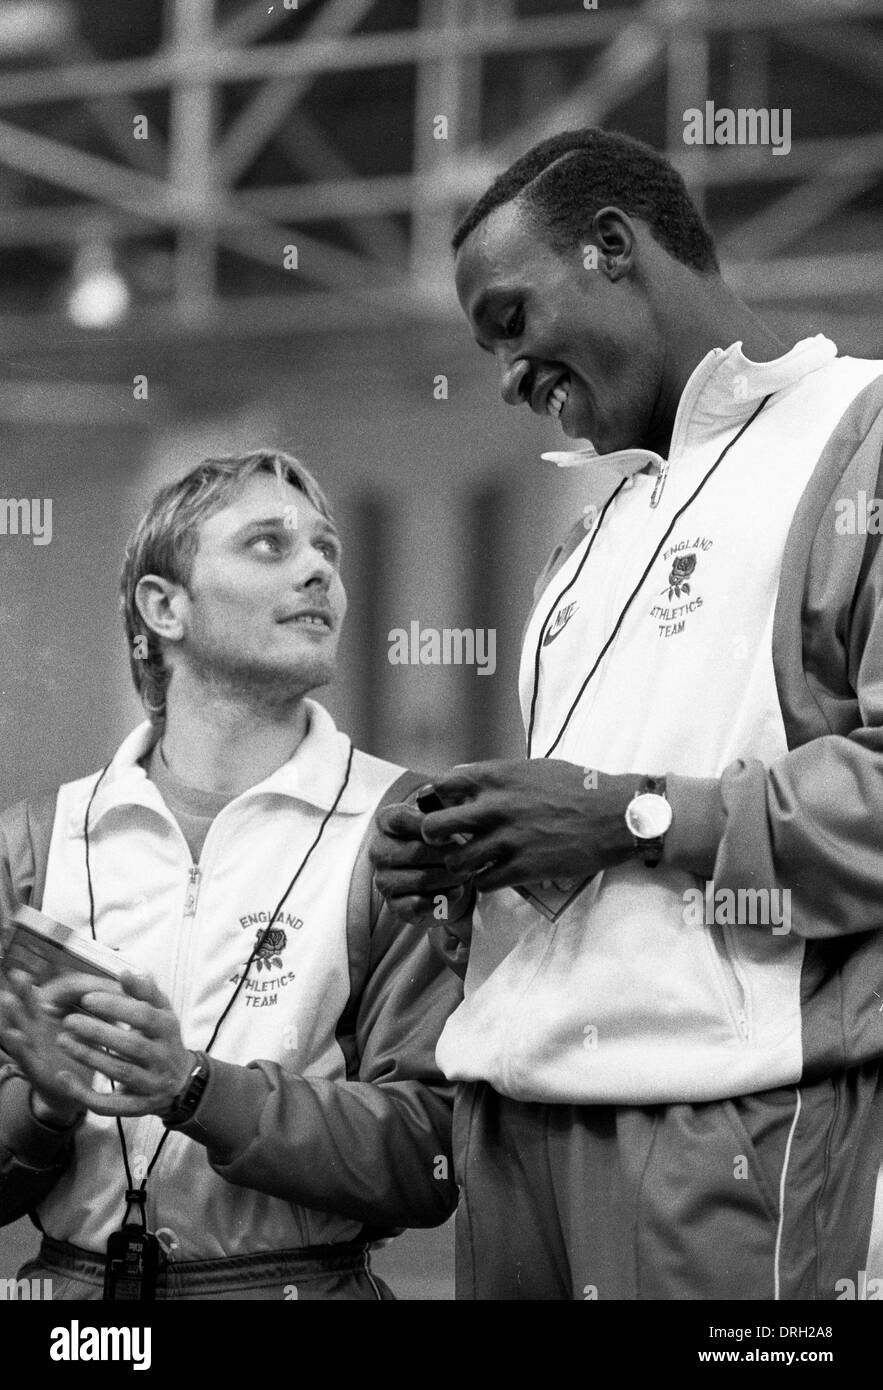 Linford Christie and Todd Bennett on podium for 200m Kodak Classic Athletics Britain v USA at RAF Cosford March 1986 Stock Photo